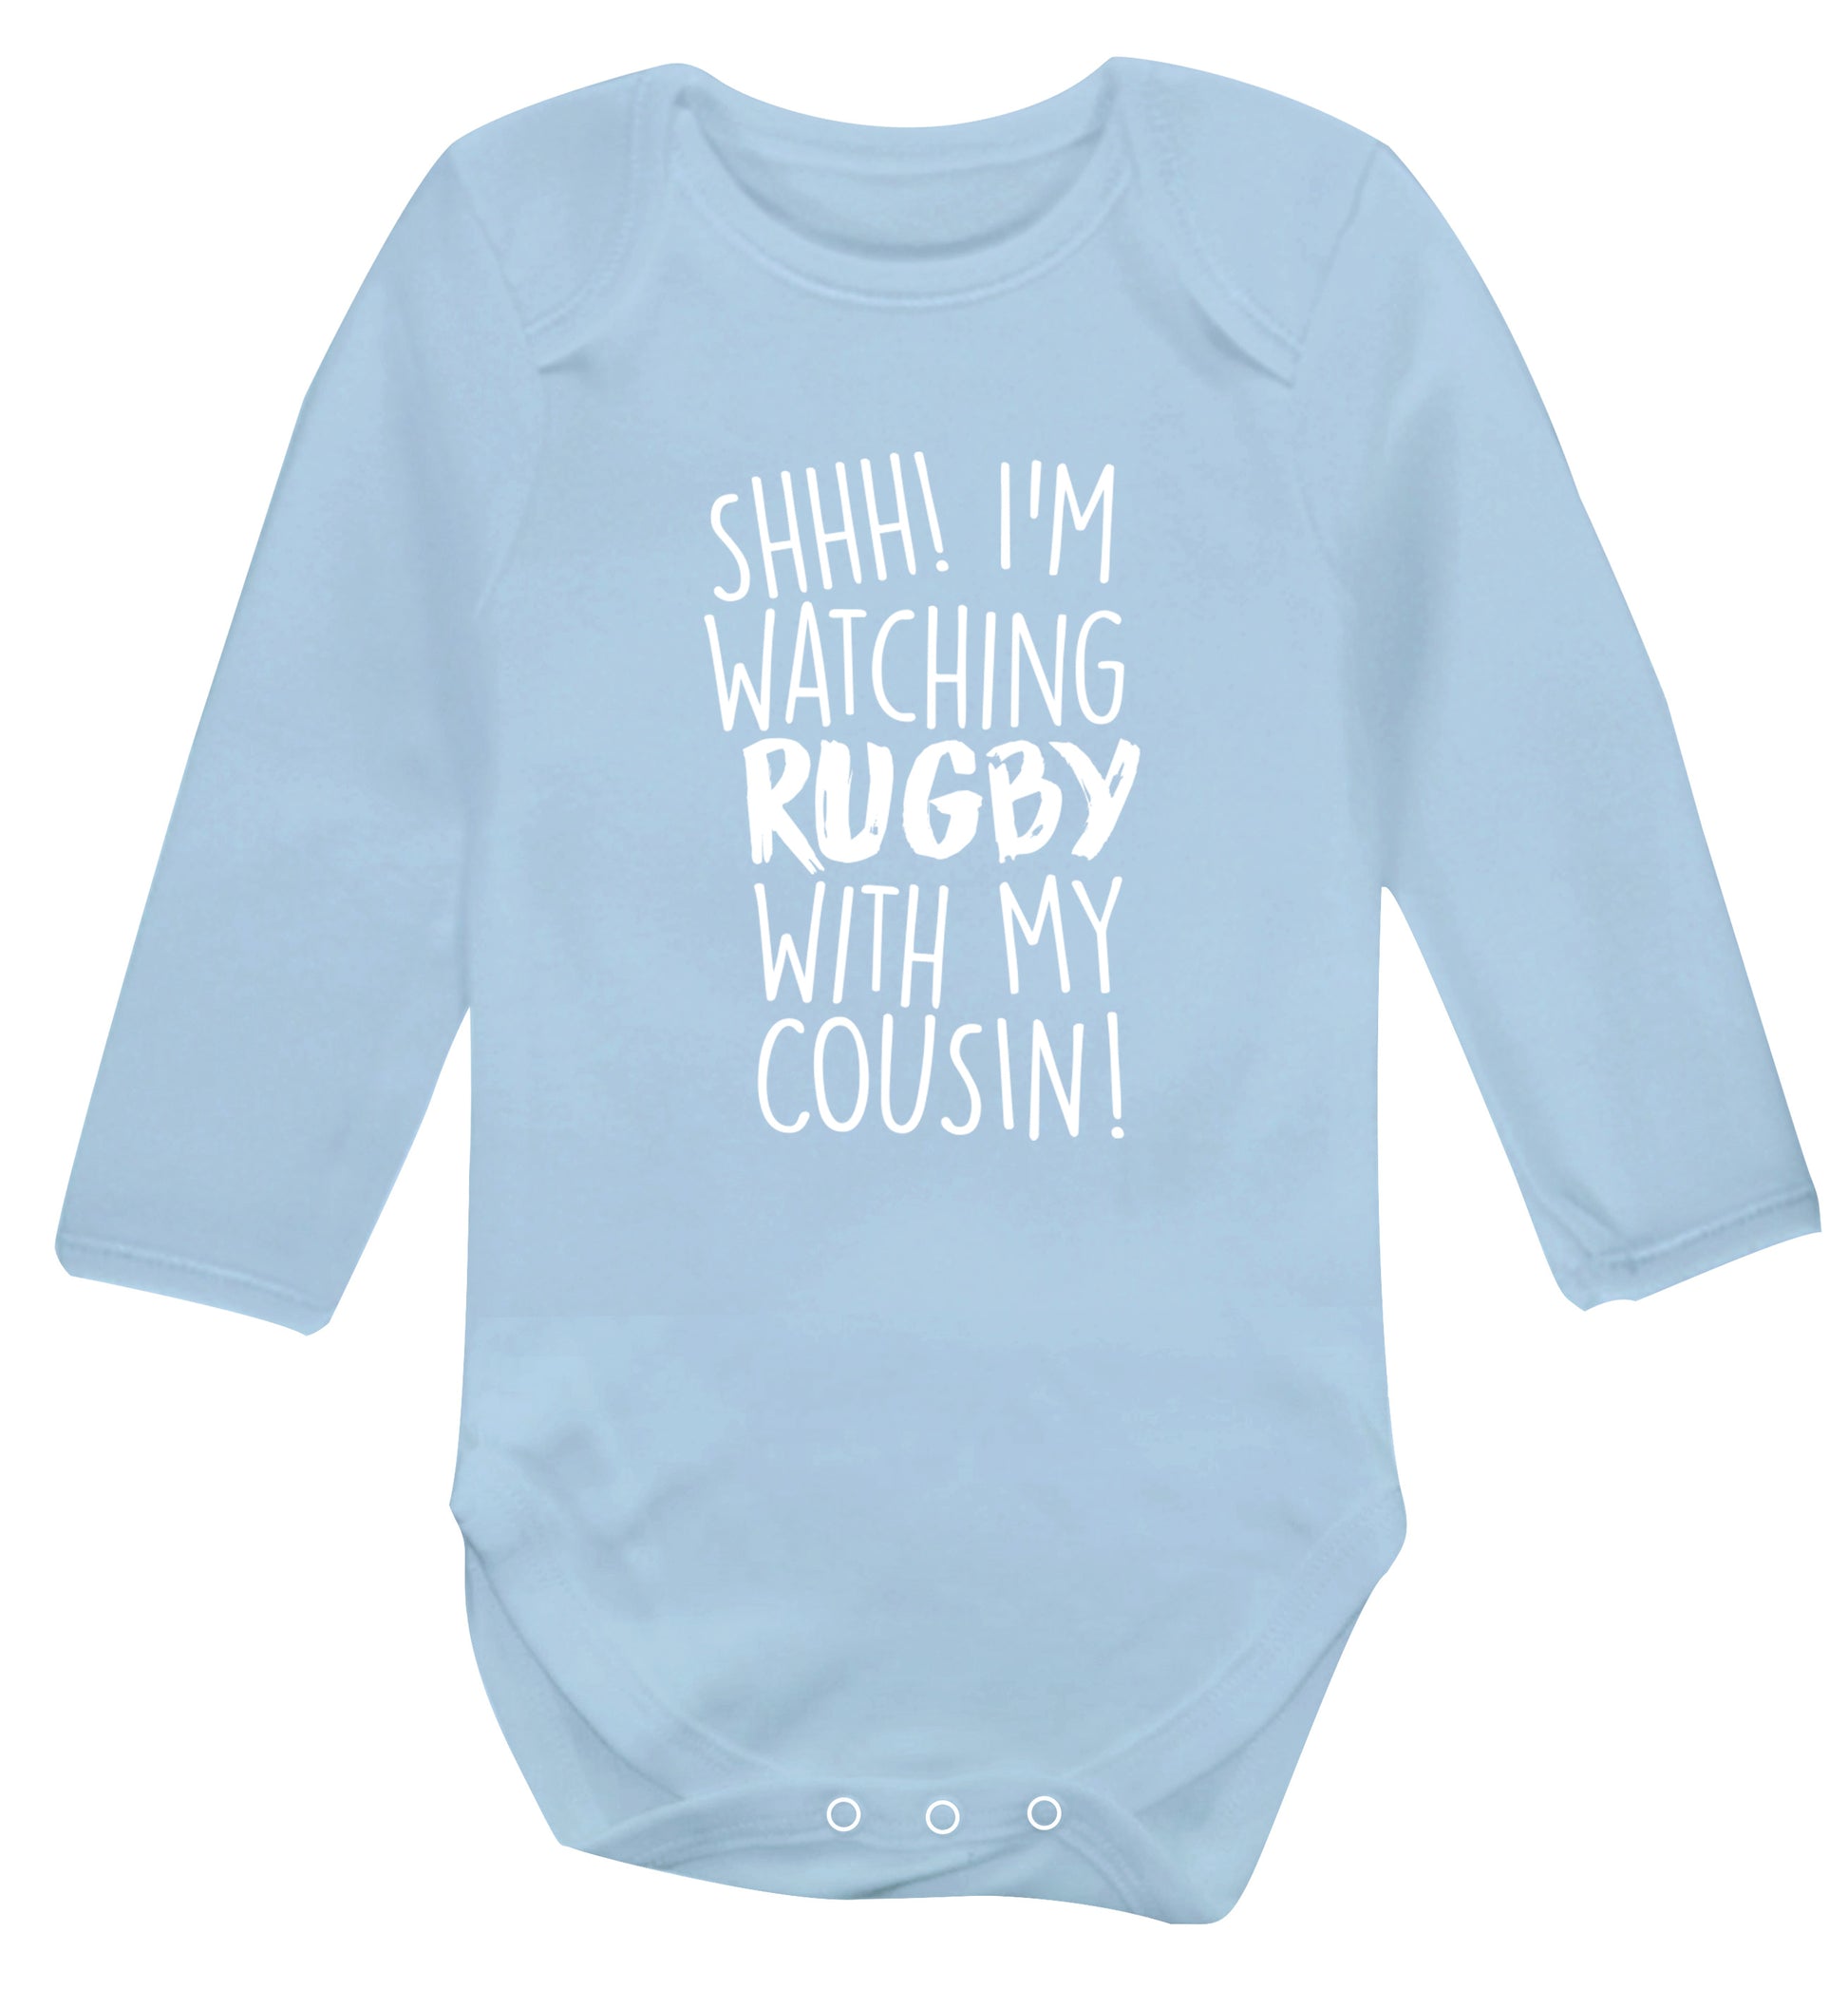 Shhh I'm watching rugby with my cousin Baby Vest long sleeved pale blue 6-12 months